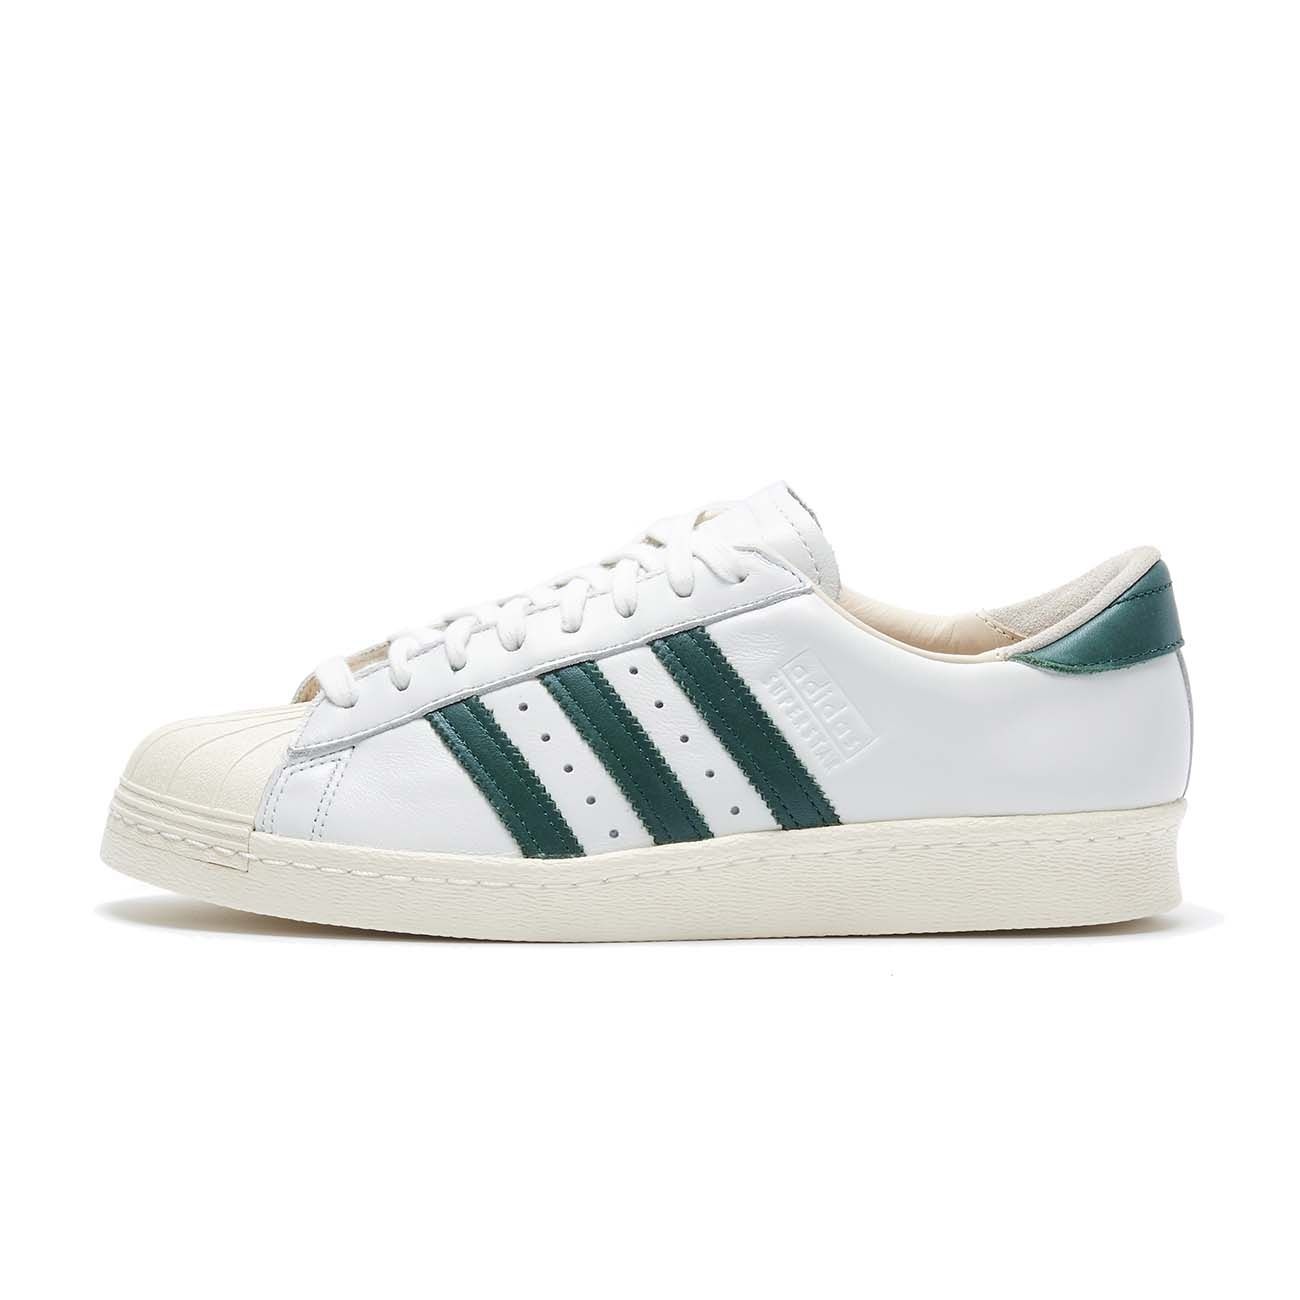 ADIDAS SNEAKERS SUPERSTAR 80S RECON Uomo Crystal white green ...